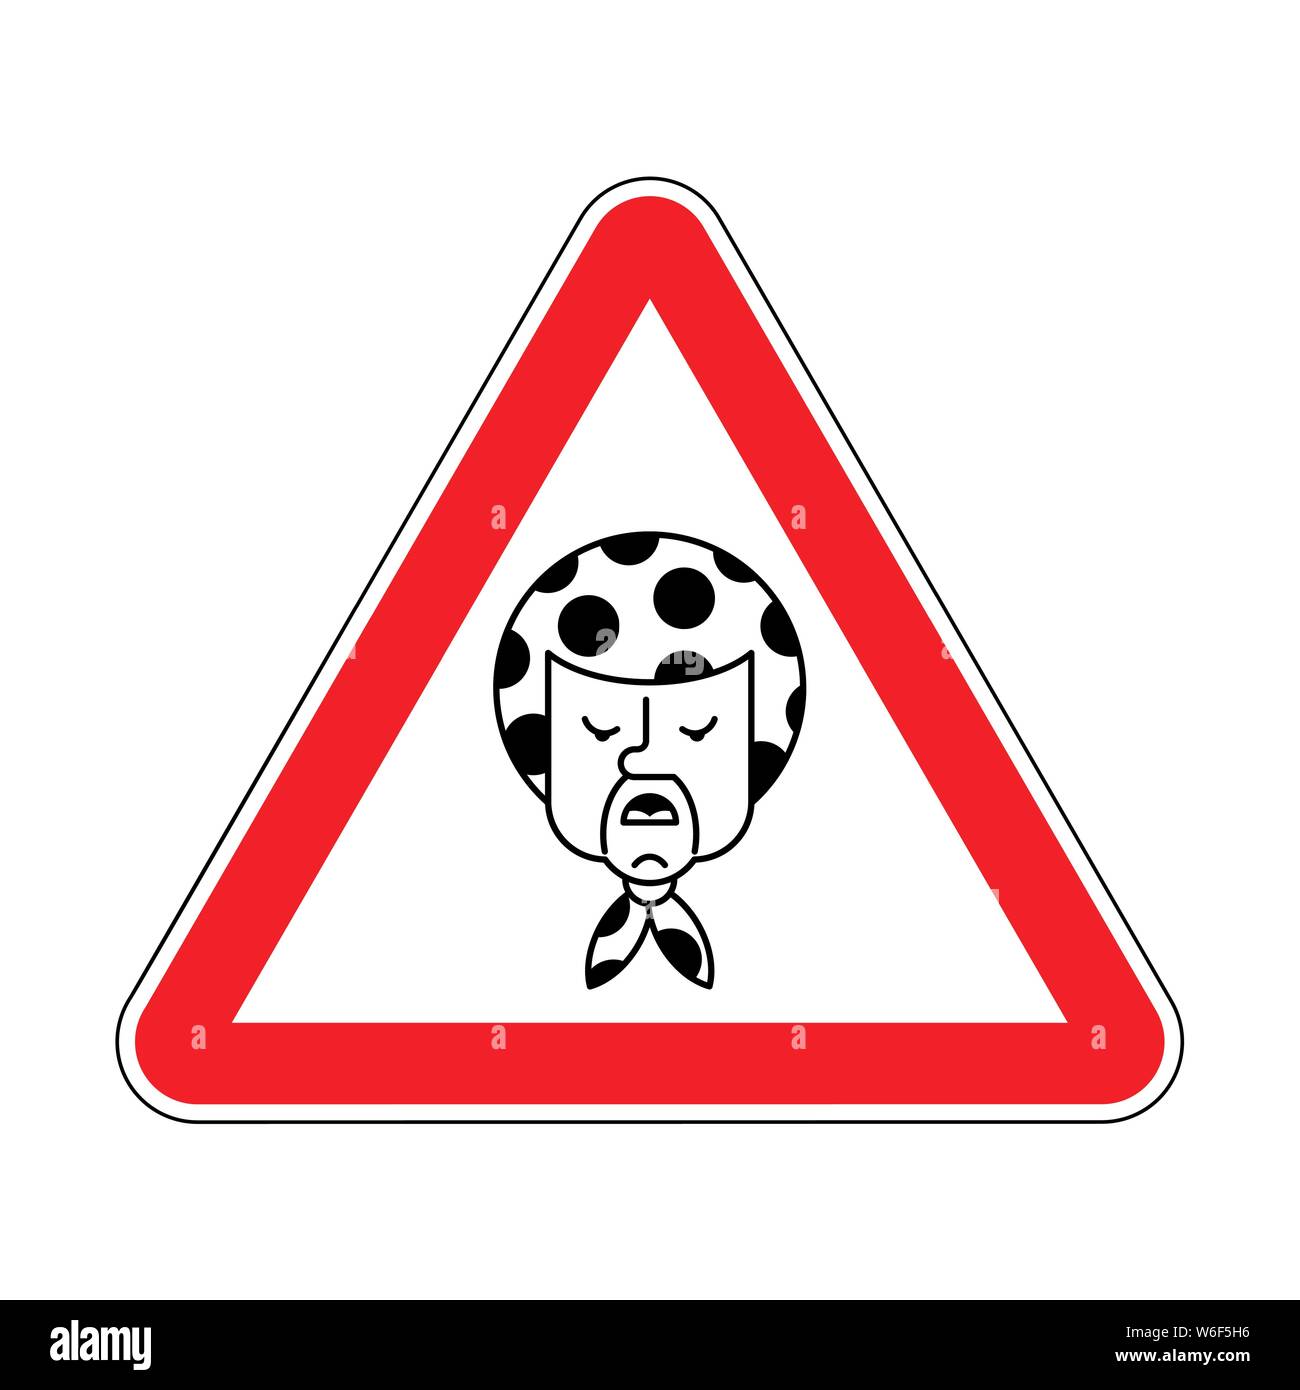 Attention angry Grandma. Caution Evil grandmother. Aggressive Old woman. Red triangle road sign Stock Vector